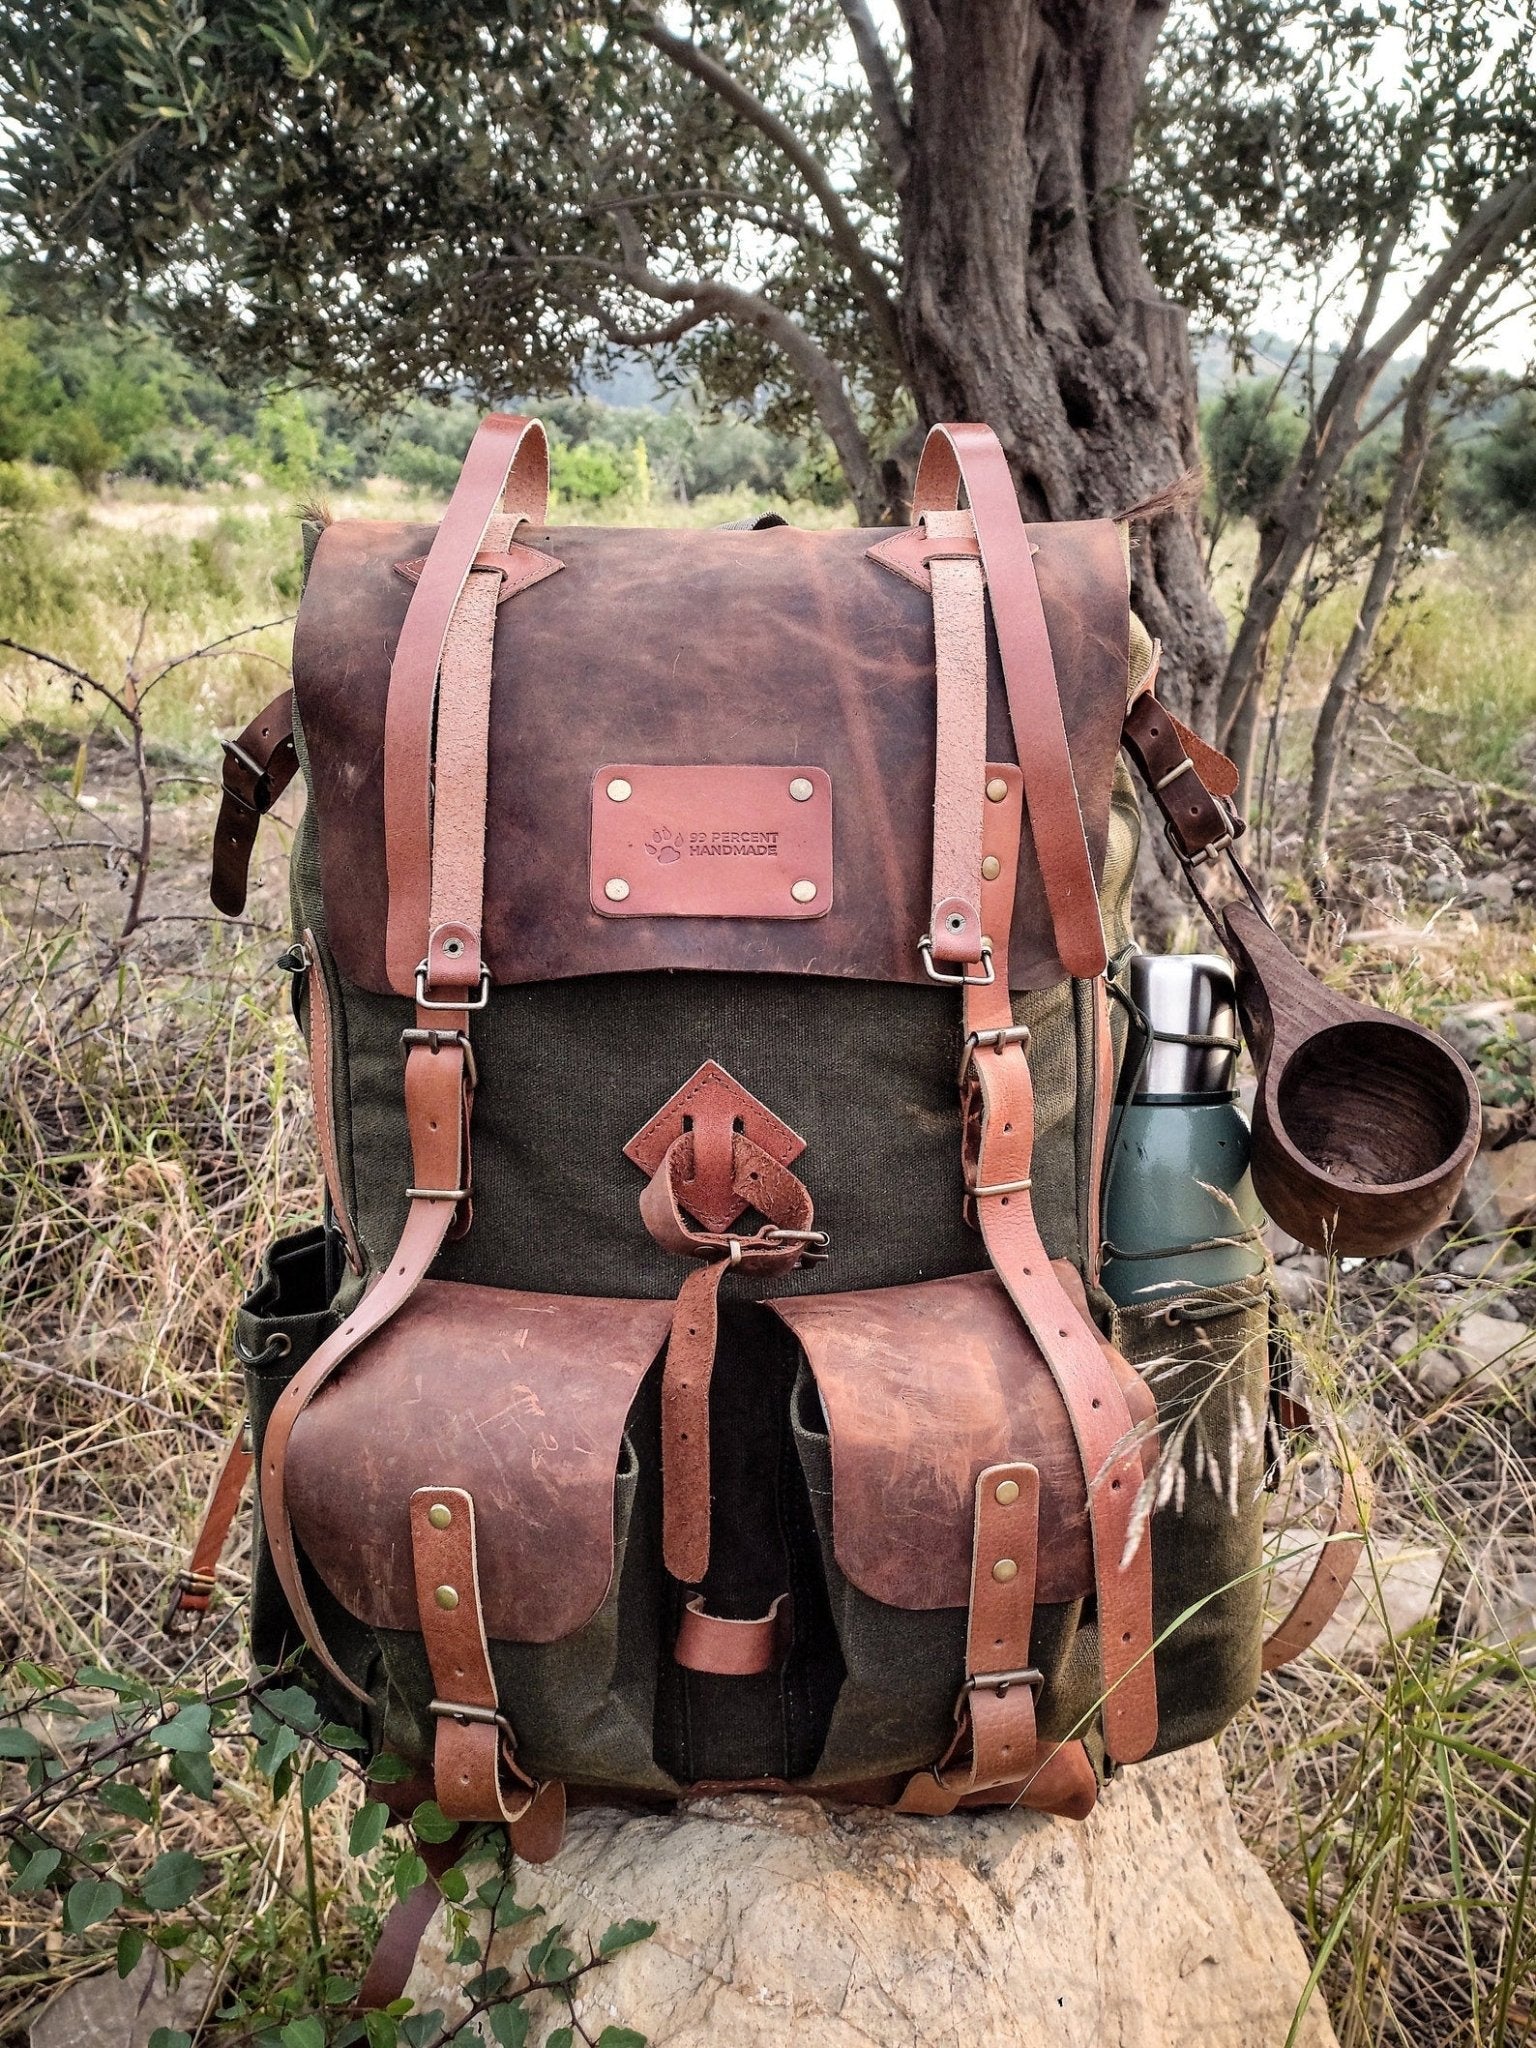 For Andre, 30 Liter to 80 Liter Bushcraft Backpack  Camping Backpack Hiking backpack Canvas Leather Backpack with Black-Brown-Green options  99percenthandmade 30 Green 